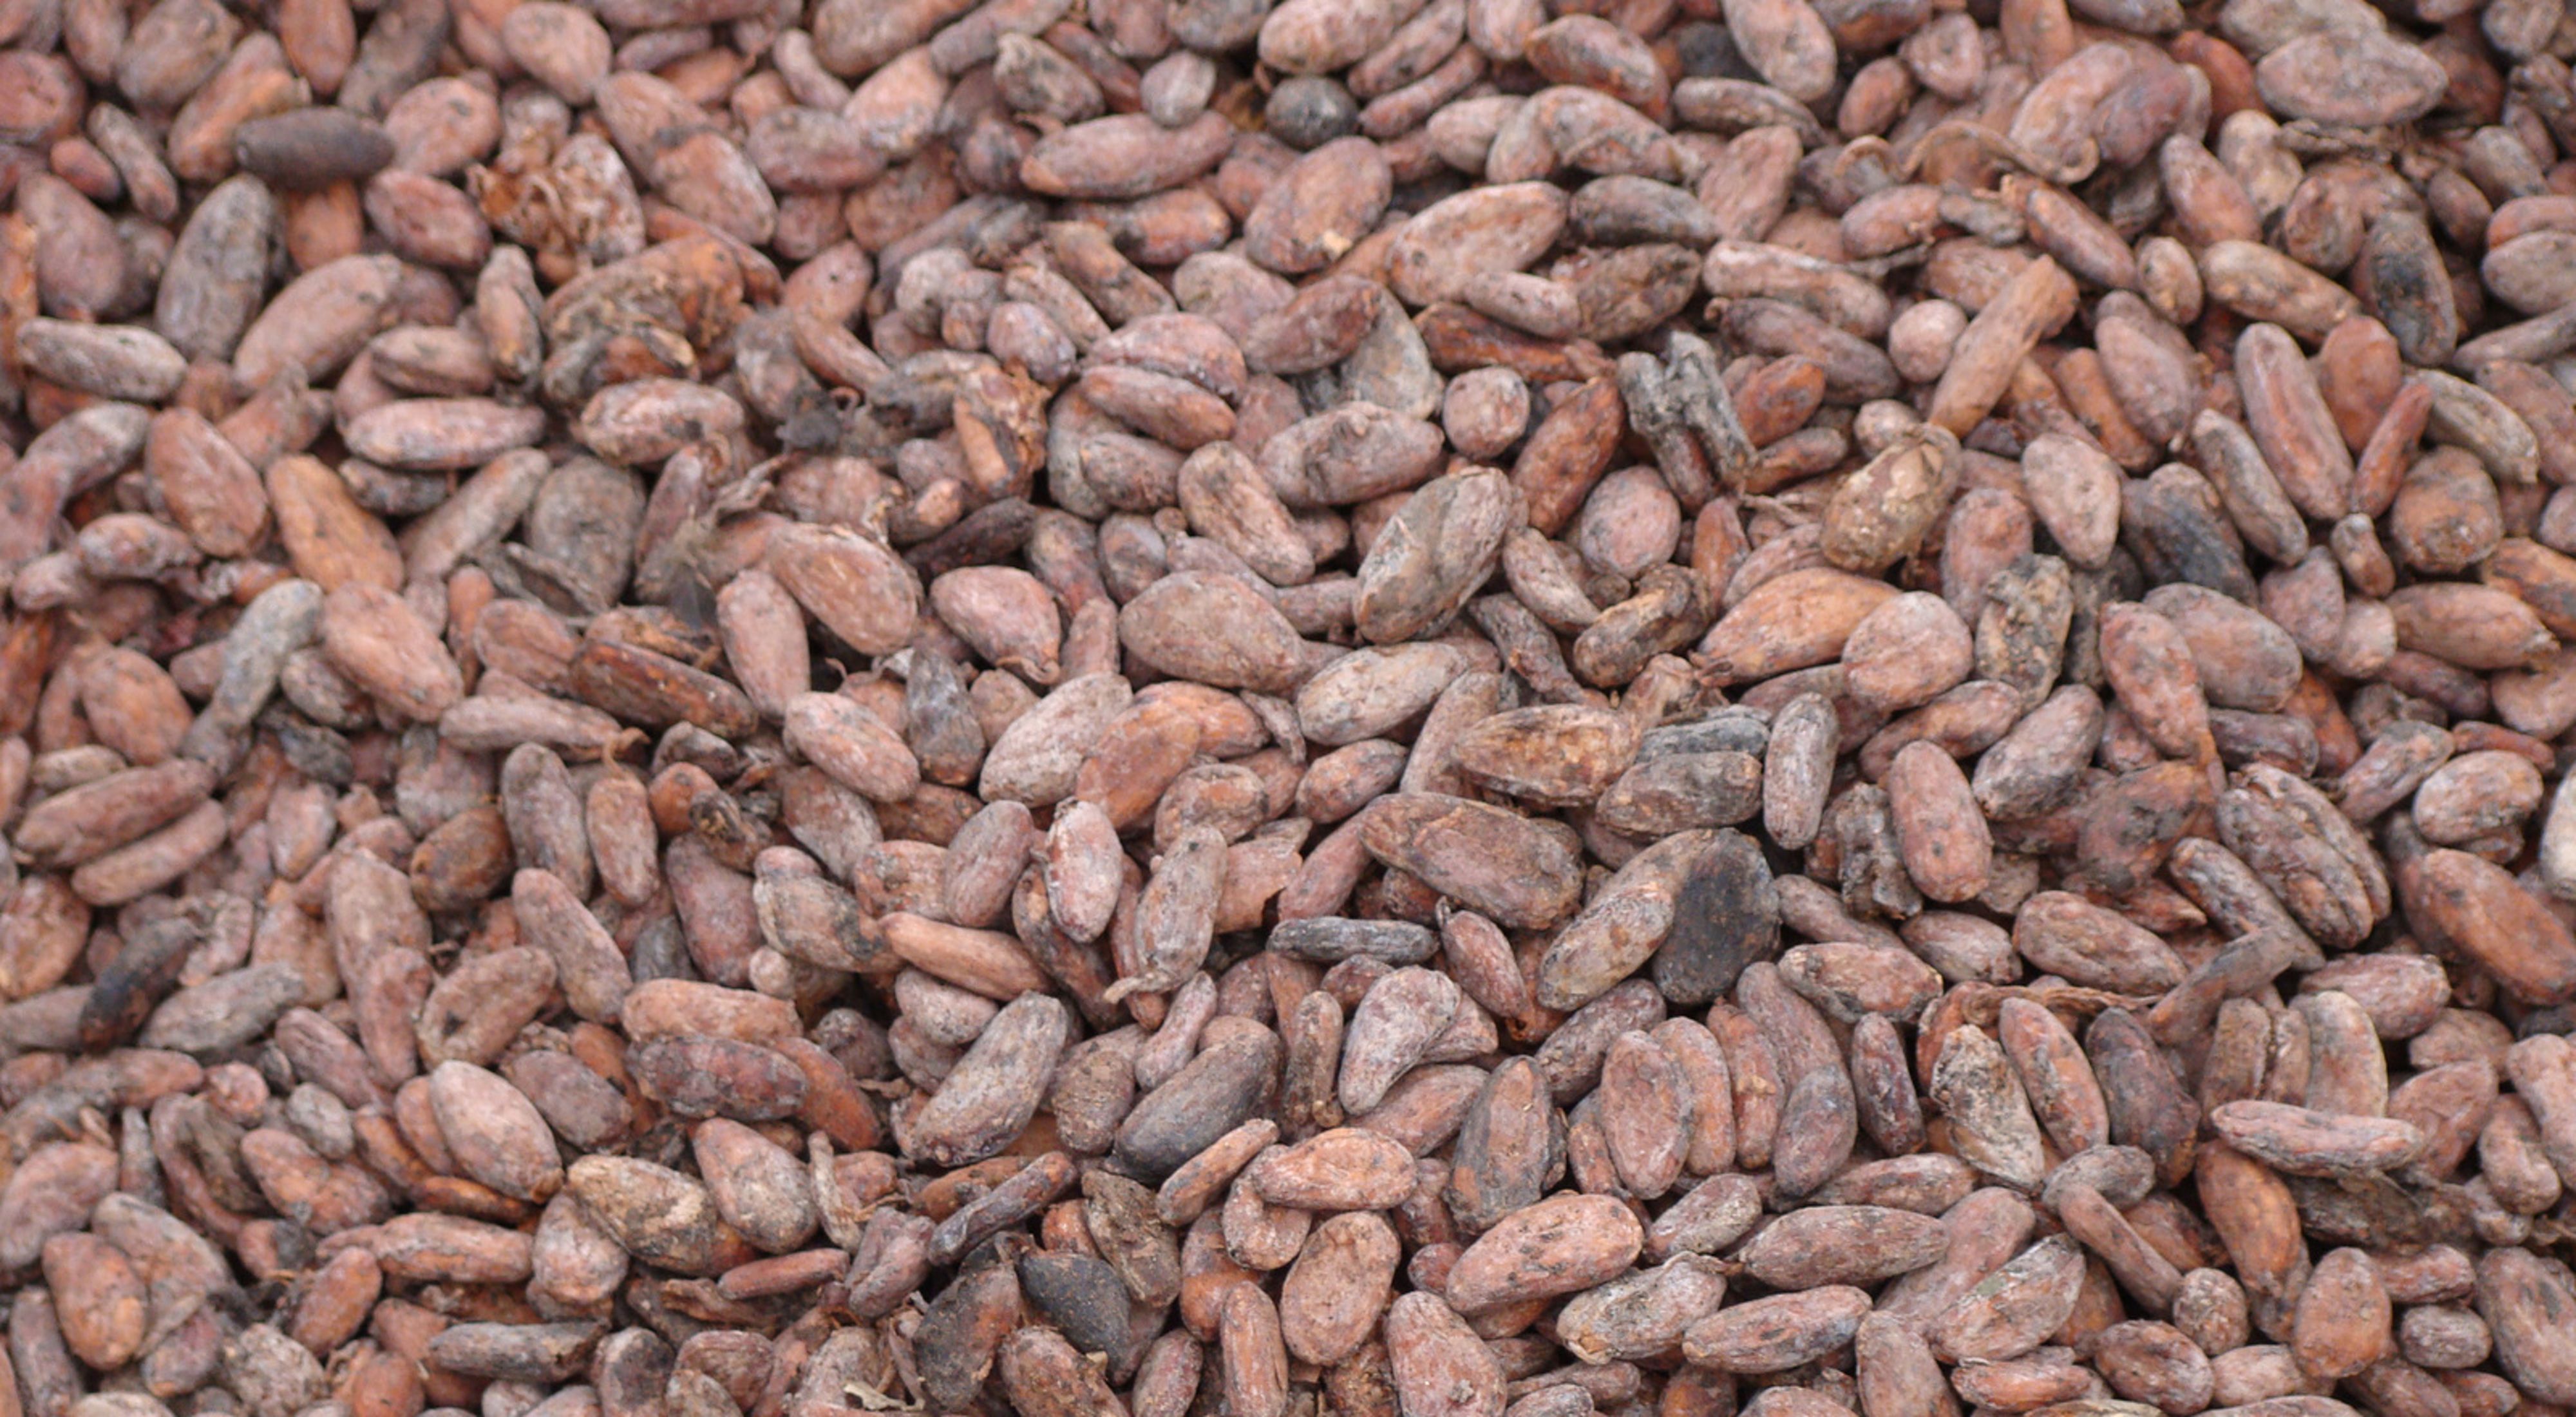  São Félix do Xingu's cocoa beans from a small cacao plantation in which the cacao trees are intermixed with mahogany and other timber species. 